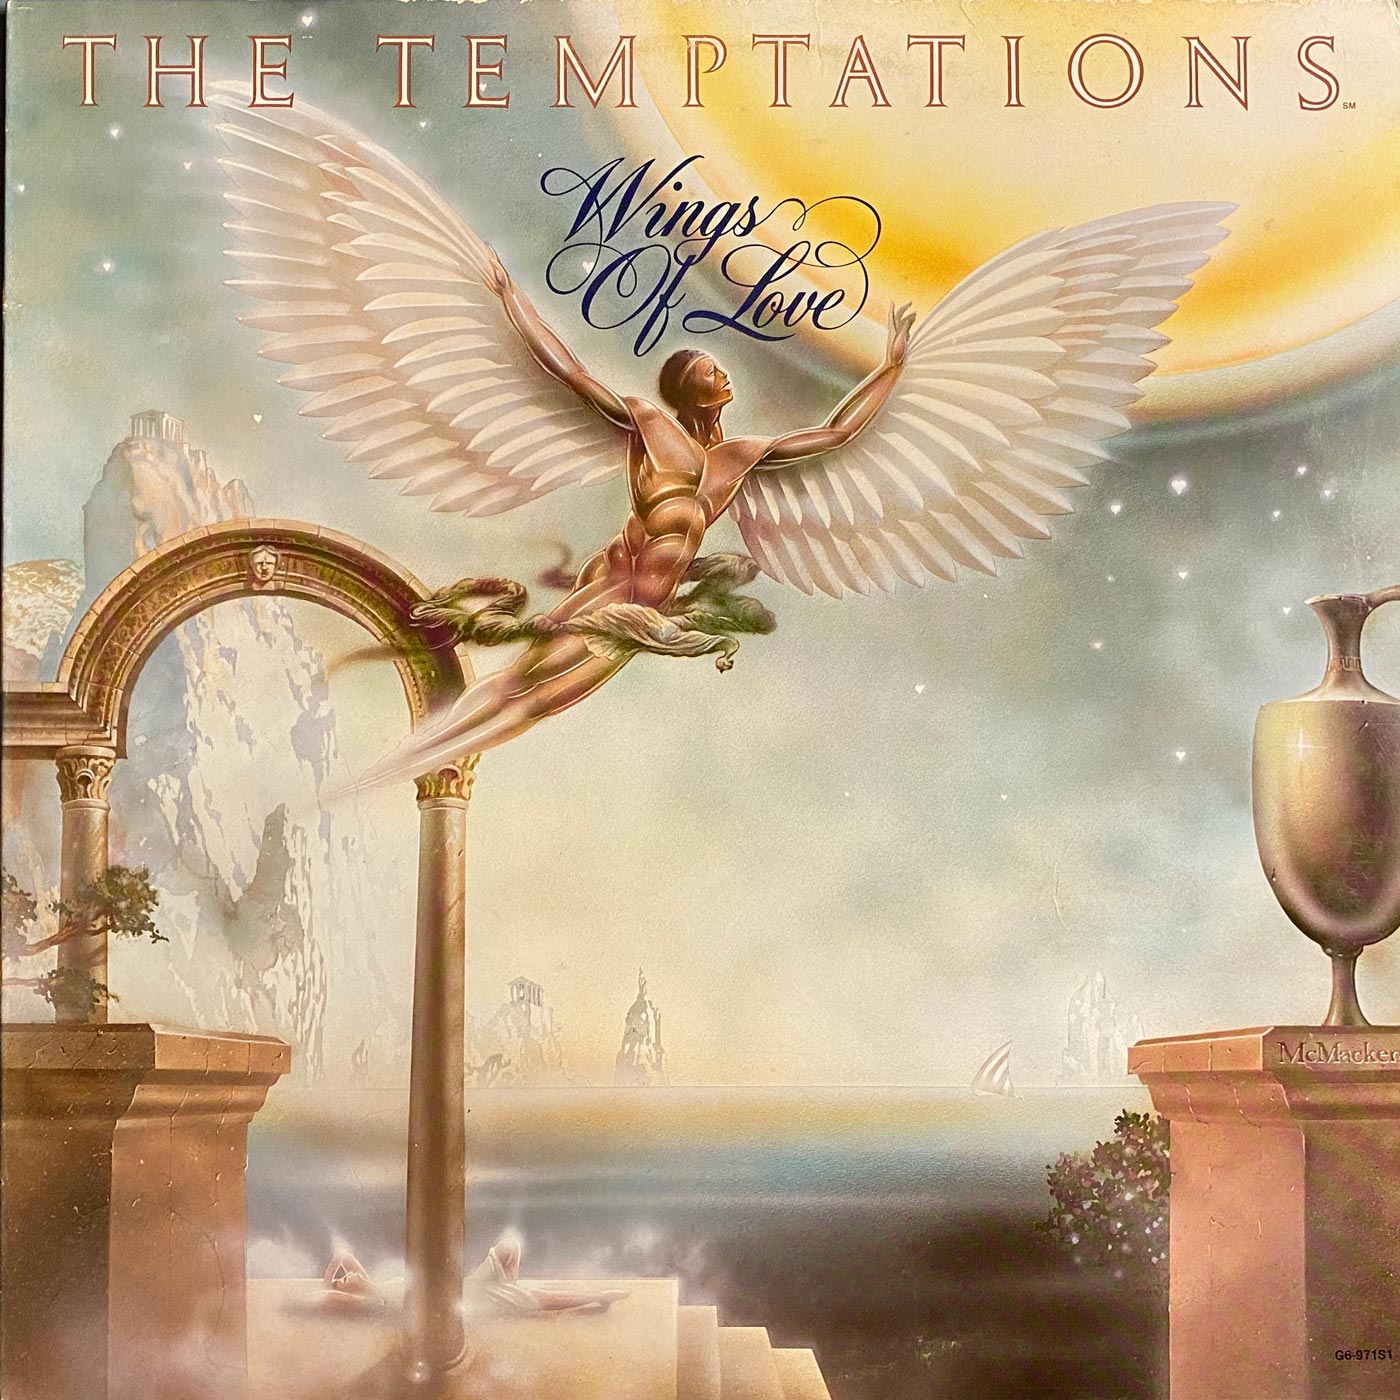 The Temptations - Wings of Love